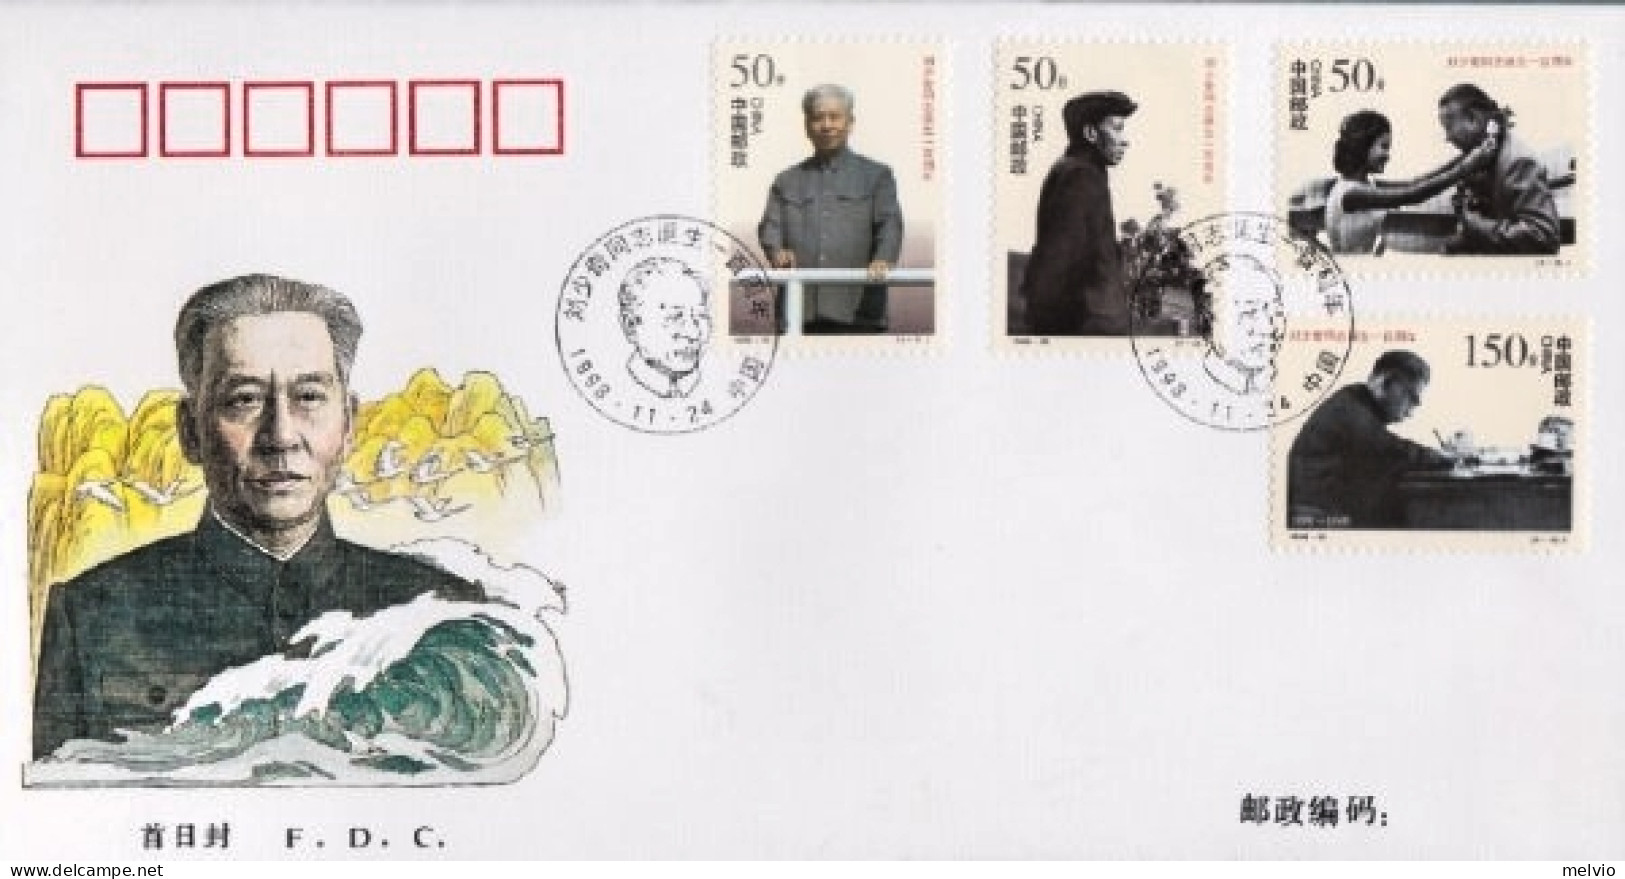 1998-Cina China 25, Scott 2916-19 The 100th Anniversary Of The Birth Of Comrade  - Covers & Documents